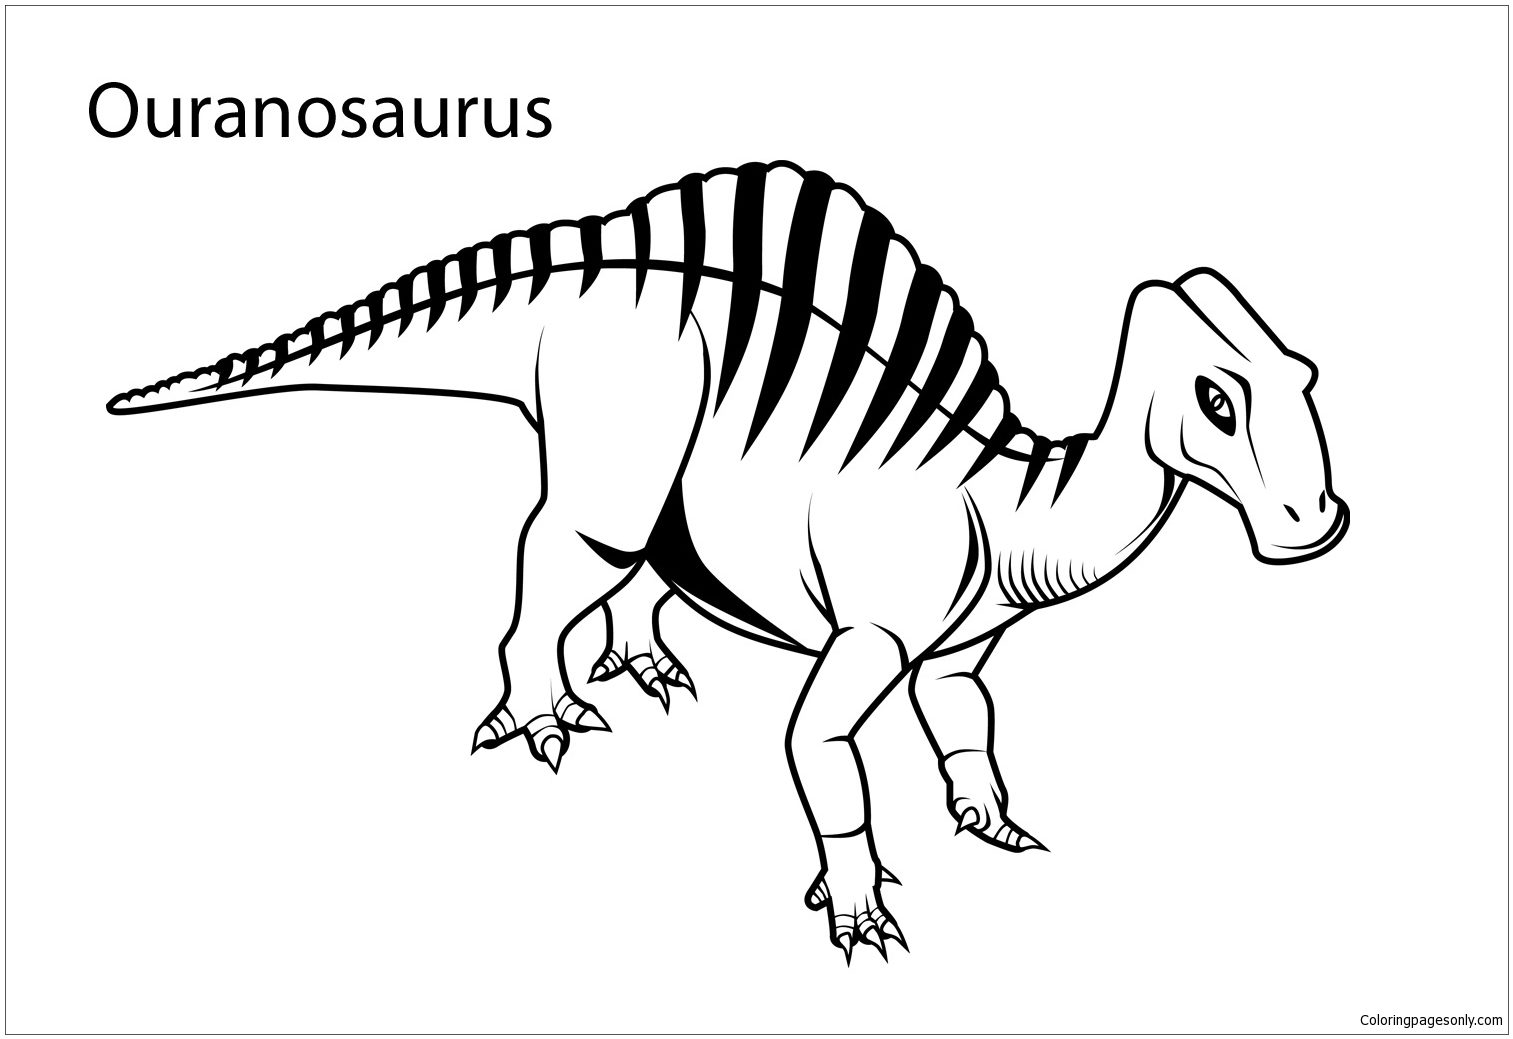 preschool-dinosaur-coloring-pages-with-names